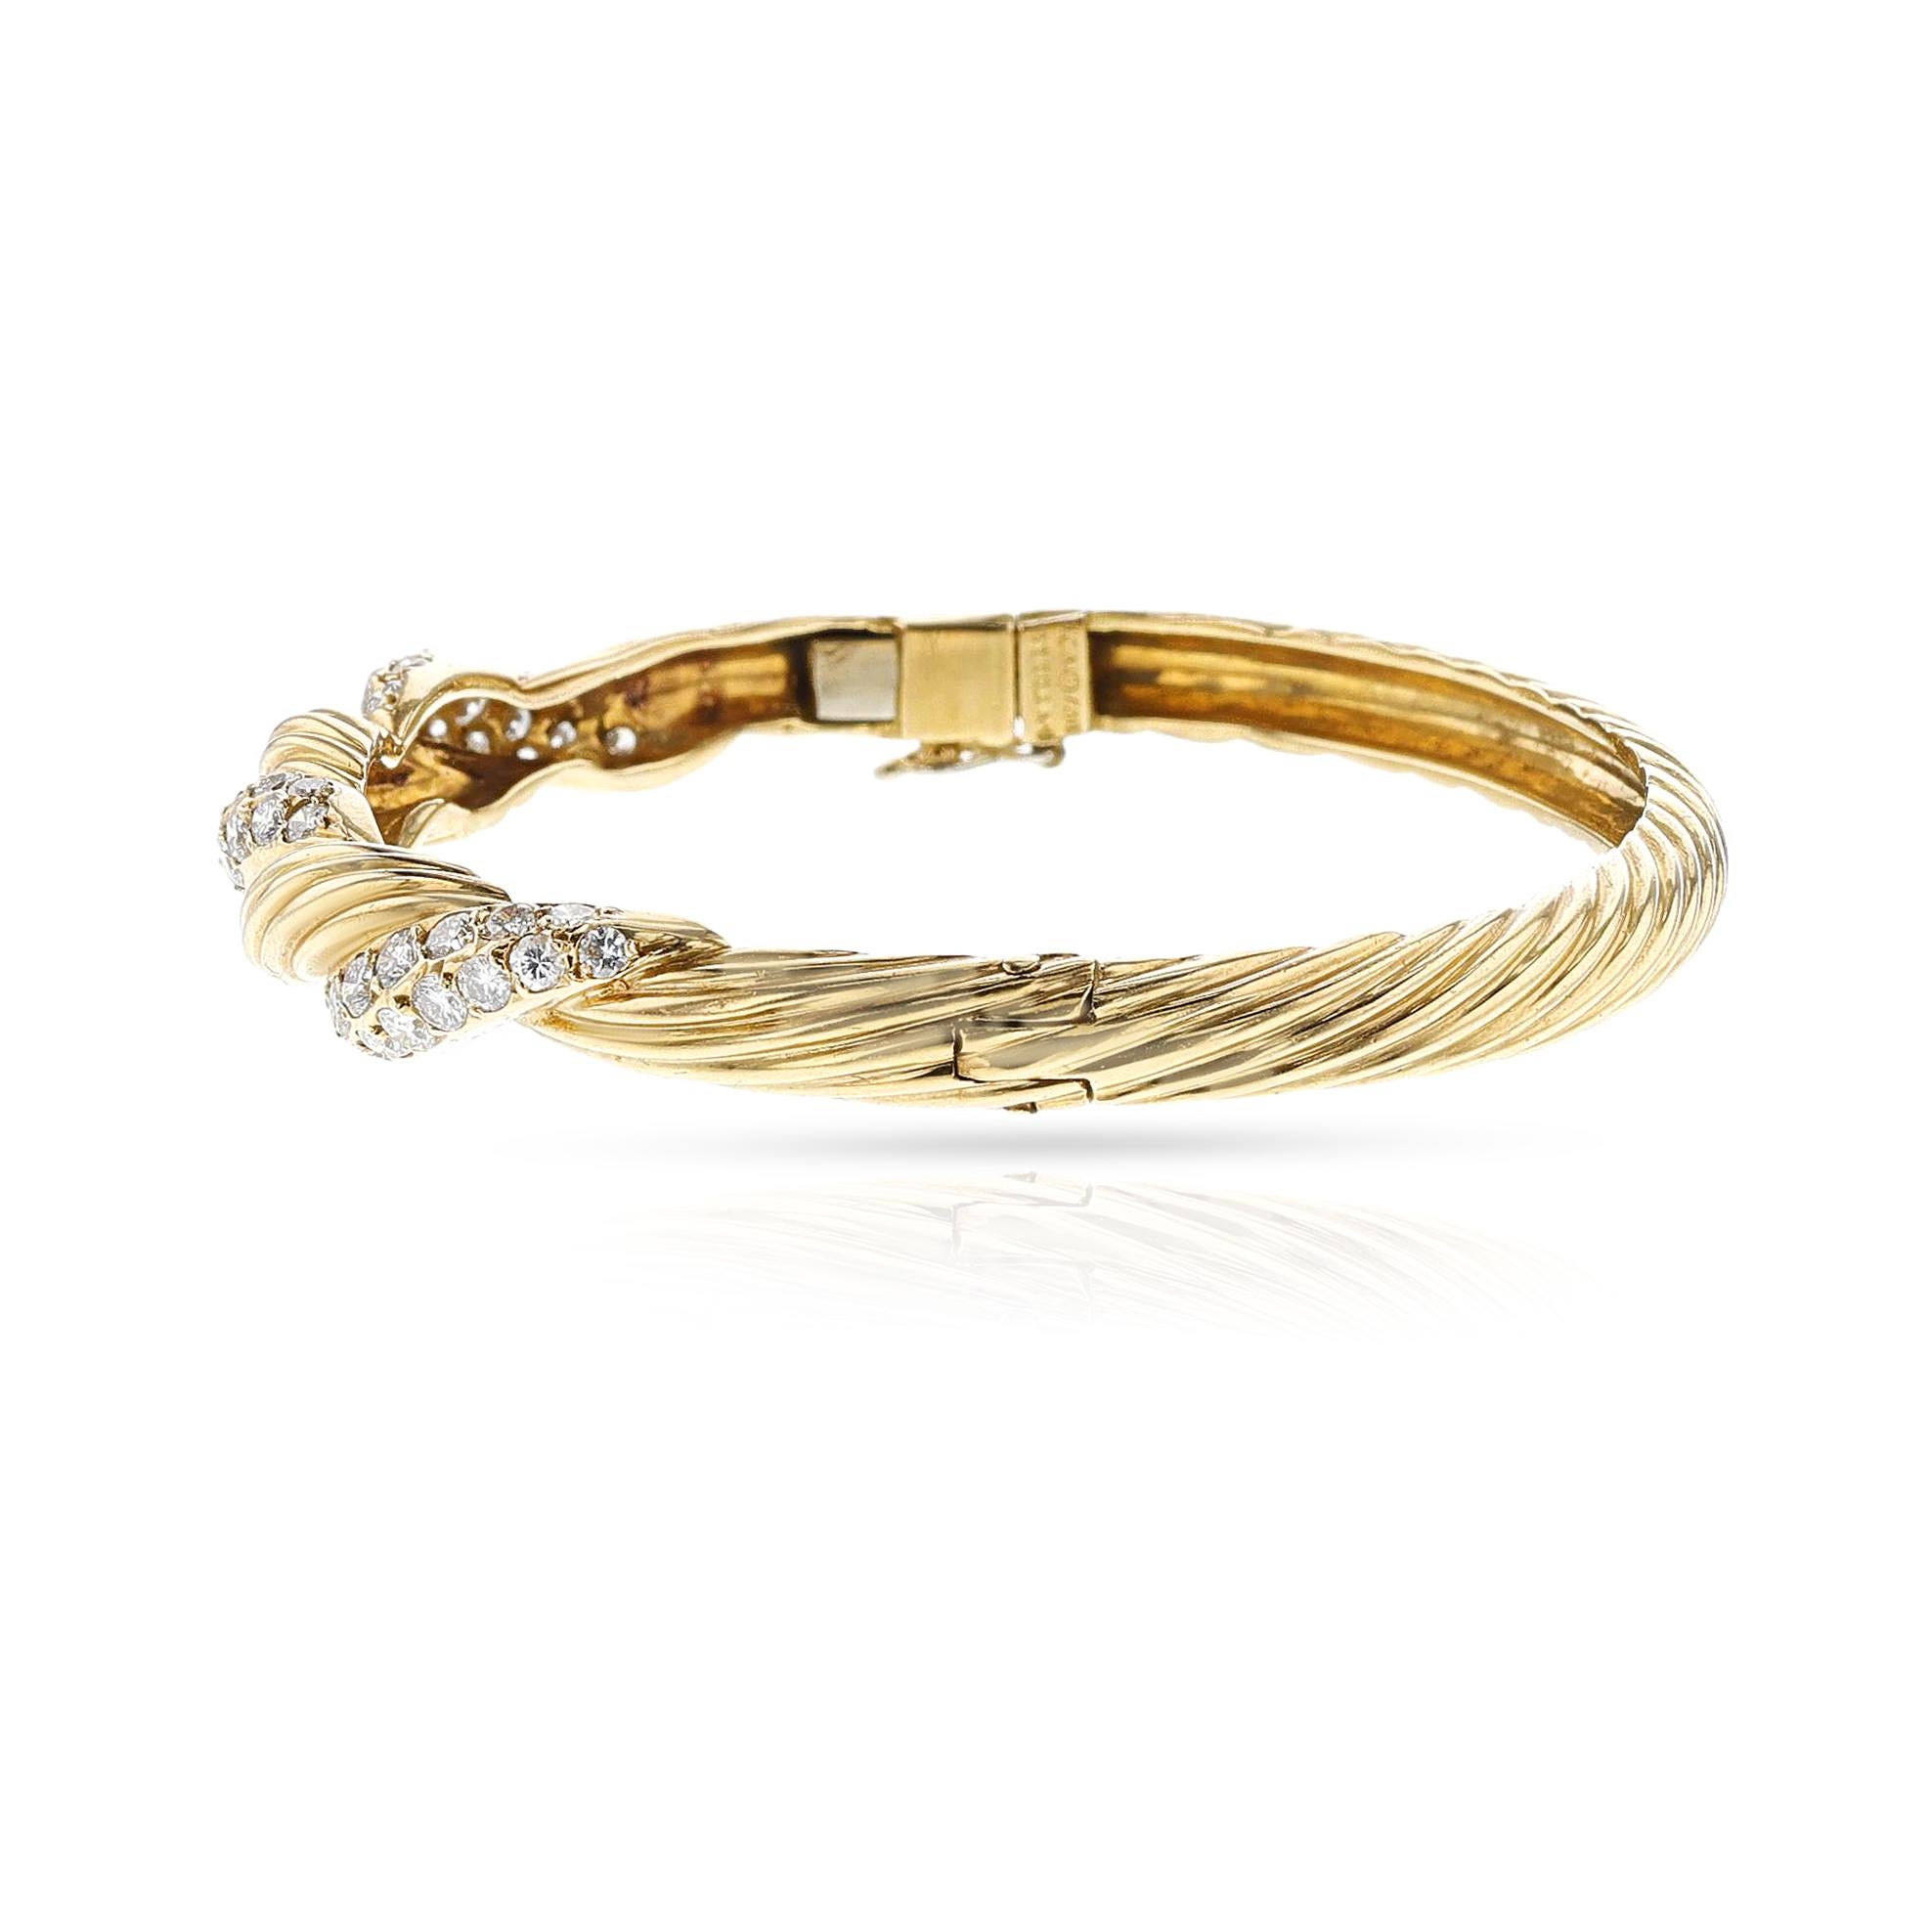 Van Cleef & Arpels Diamond and Gold Twisted Bangle, 18k In Excellent Condition For Sale In New York, NY